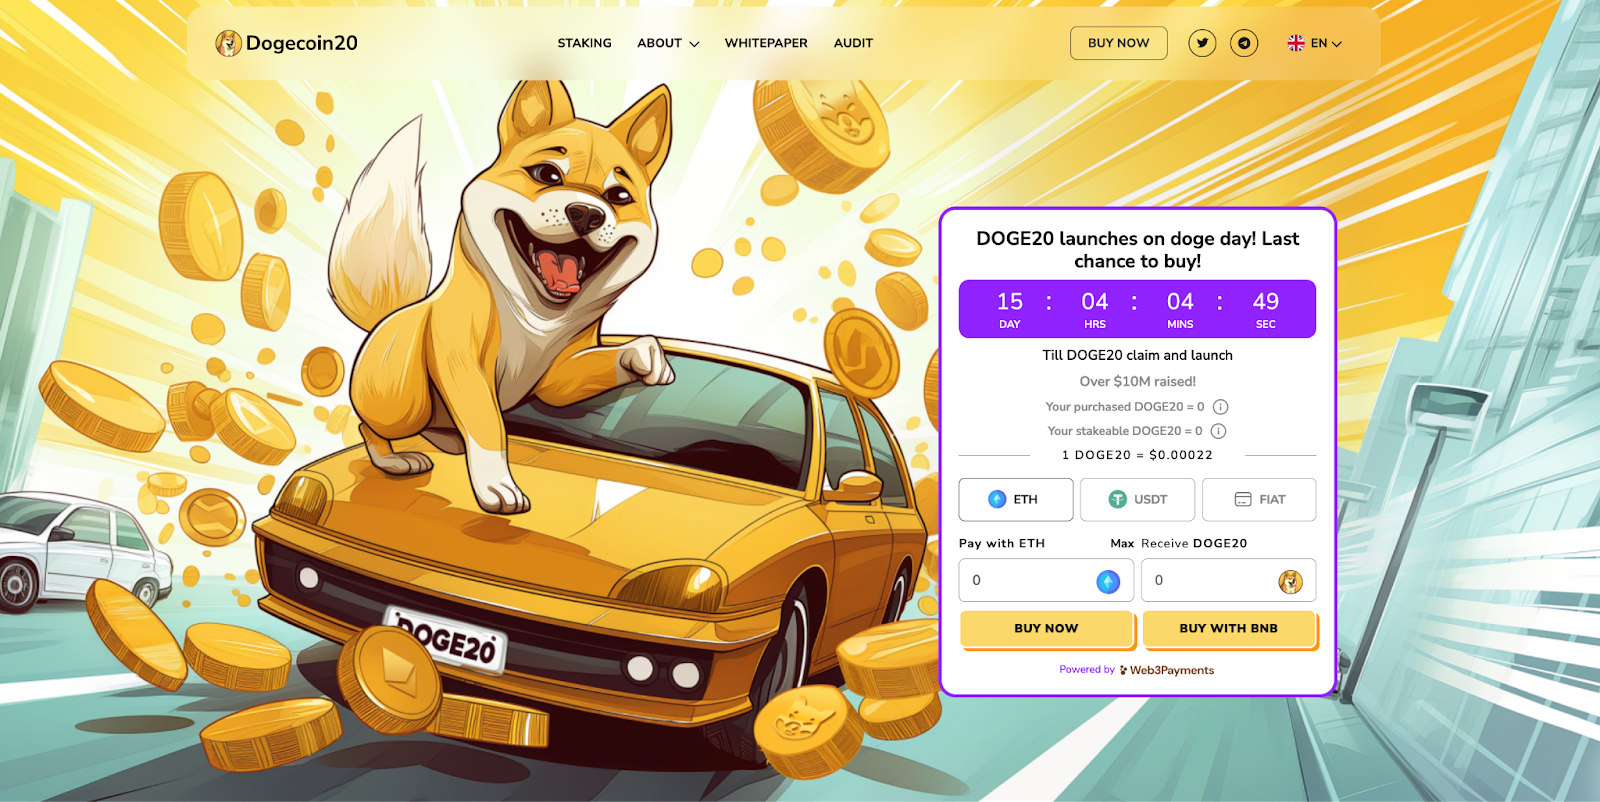 Dogecoin Down 20% But Analysts Believe It Will Hit $0.3 In April, While Dogecoin20 Turns Heads Ahead of Doge Day Launch - Market Release - News